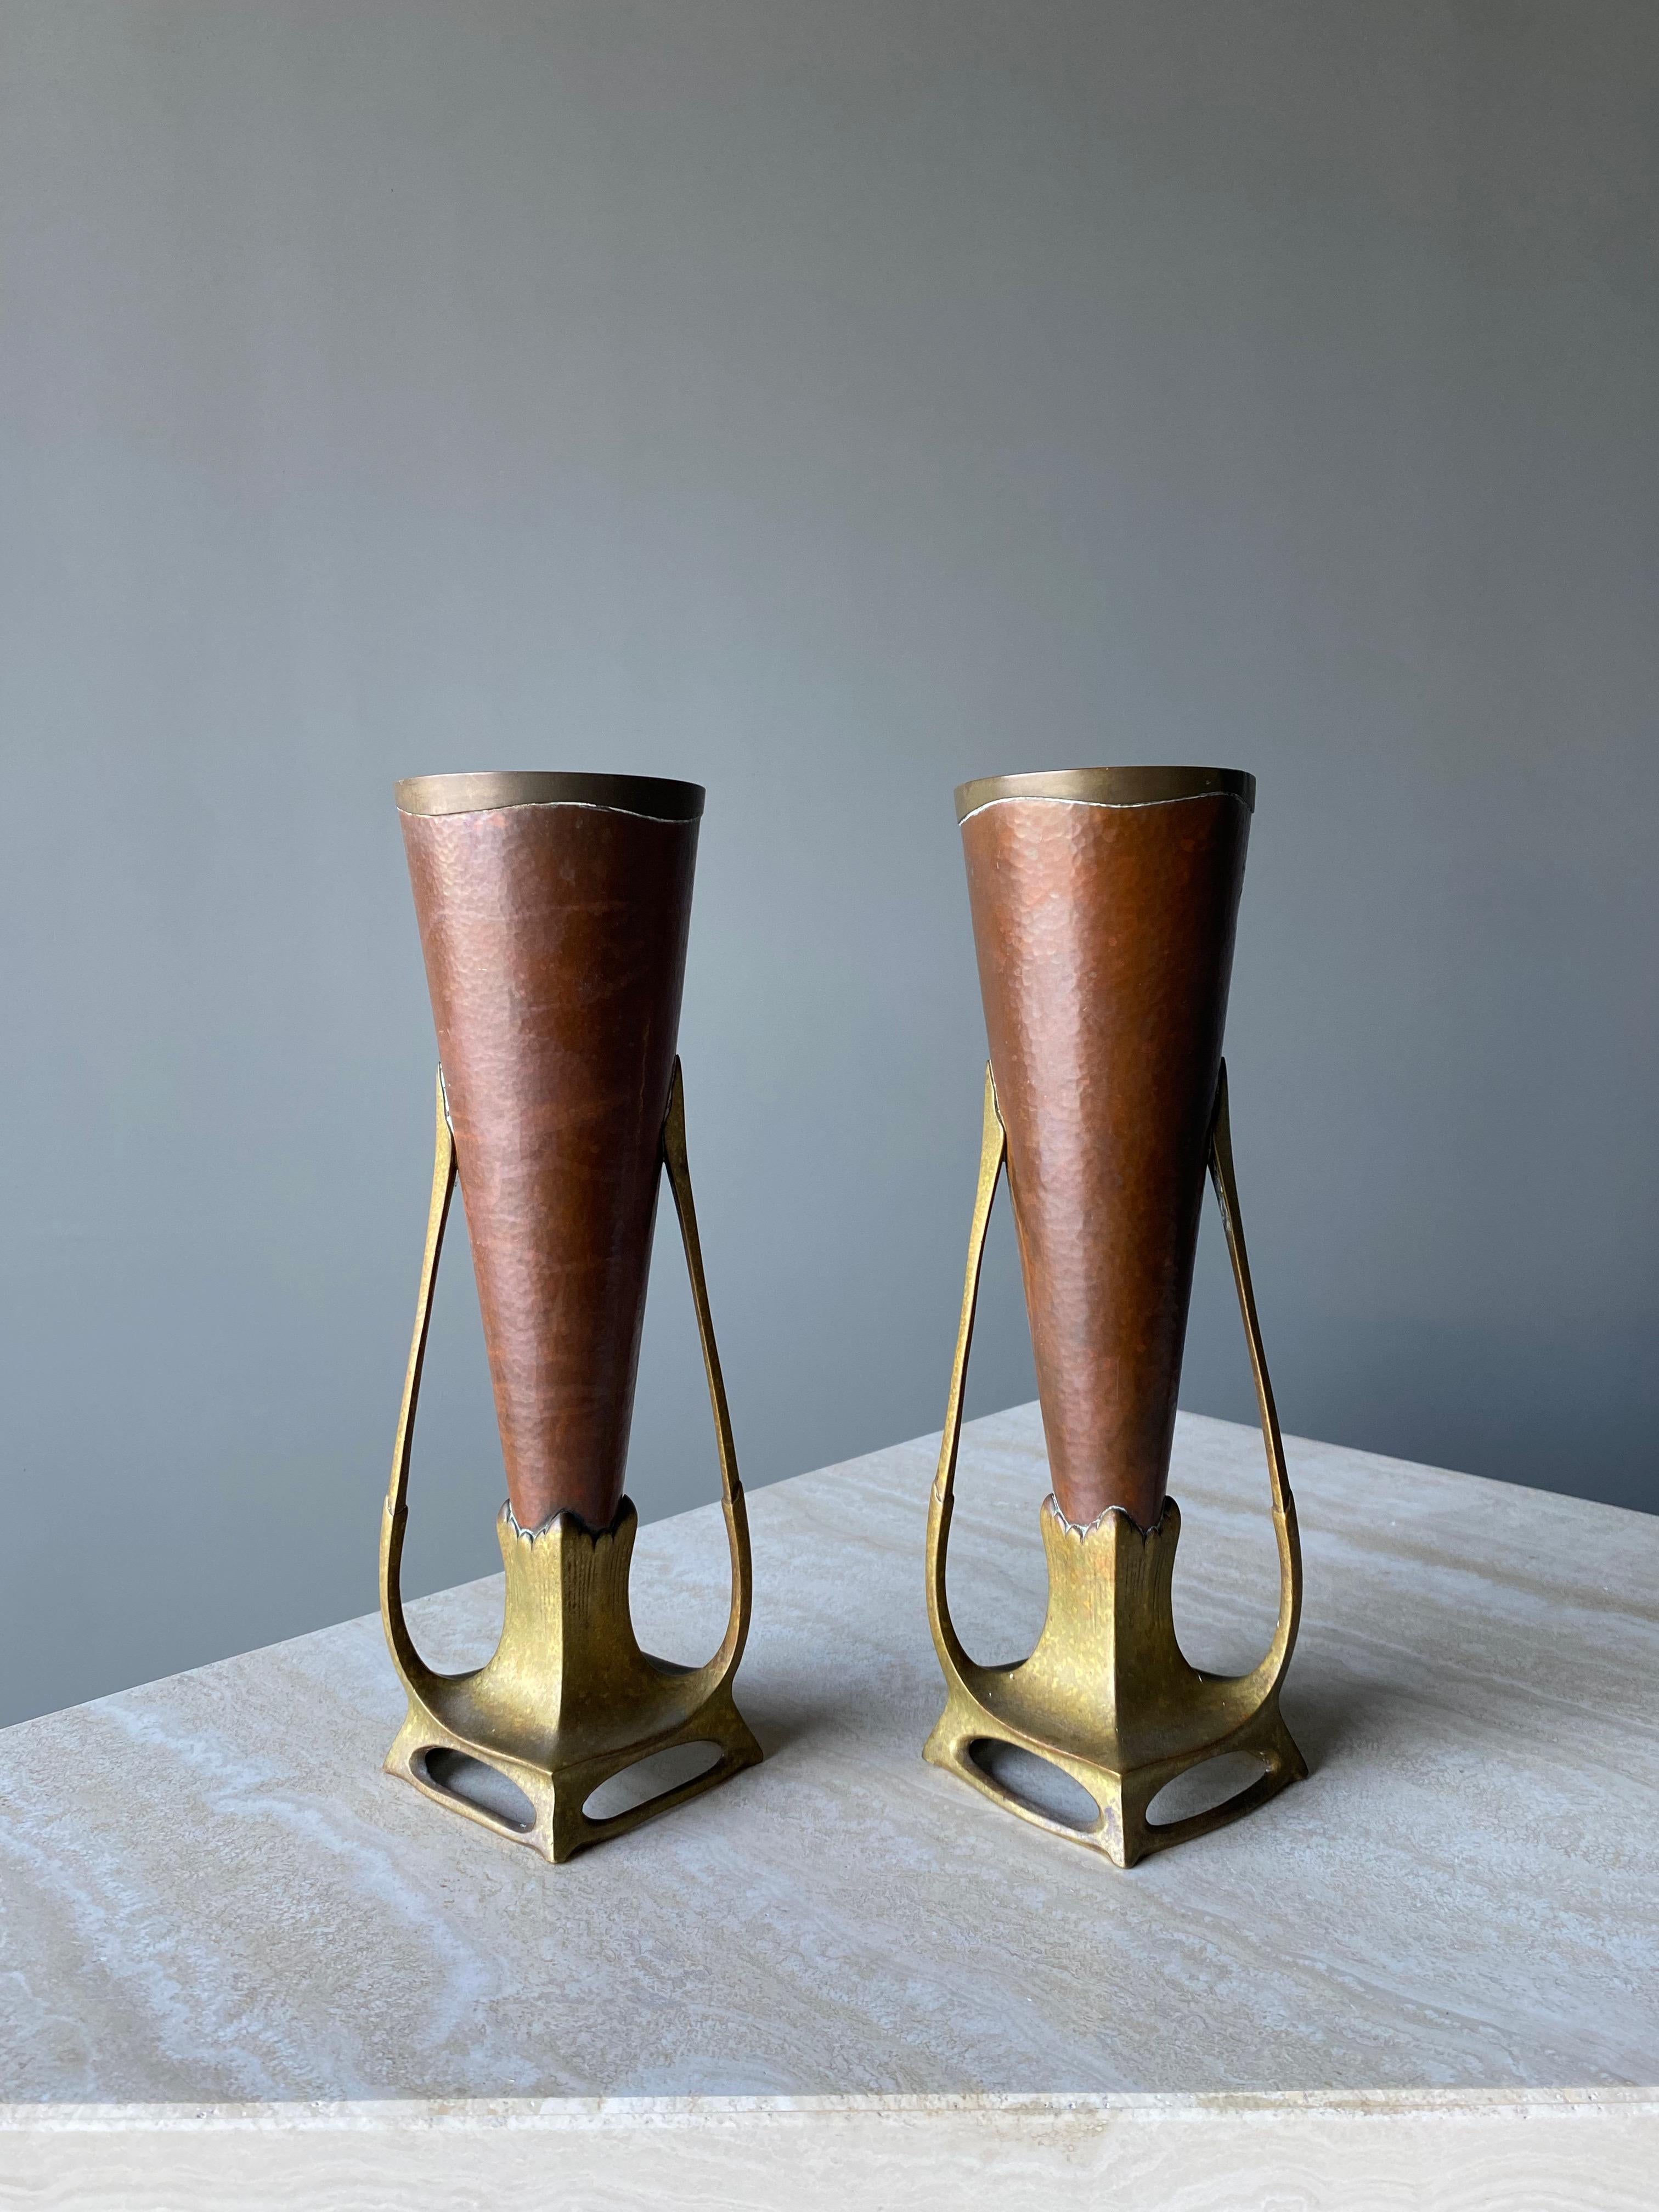 Hand-Crafted Carl Deffner Pair of Hammered Copper & Cast Bronze Vases, Germany, circa 1900 For Sale